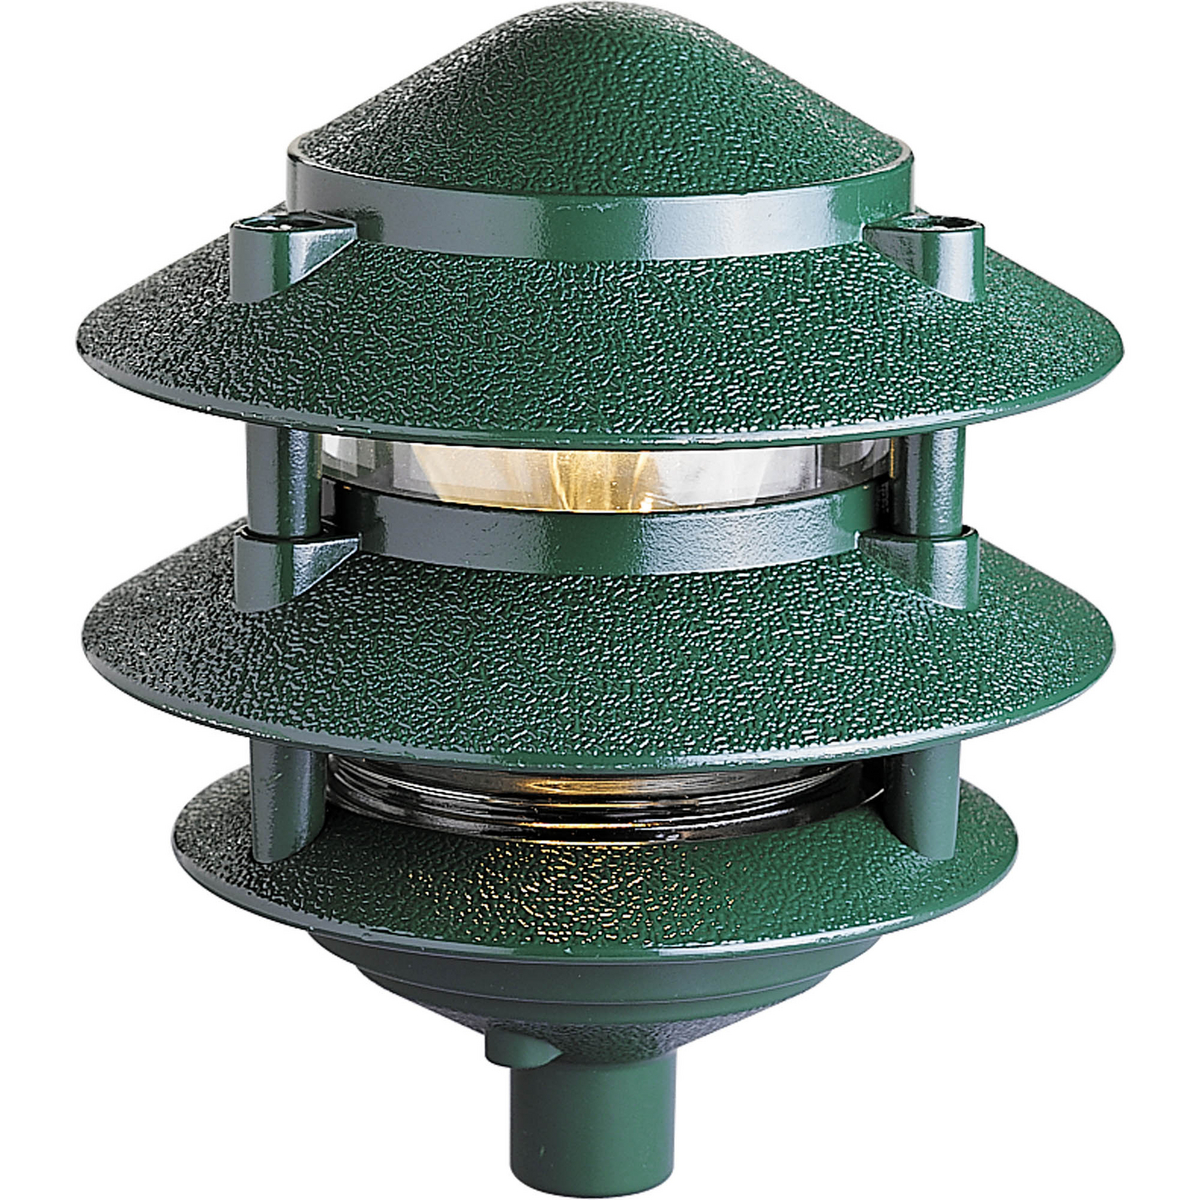 Pagoda three-tier style one-light die-cast aluminum landscape with clear glass liner in a Green painted finish. 1/2 IP threaded fitting. Mounts on landscape post (P8562-31), stake (P5233-31) or approved weatherproof box (order separately).